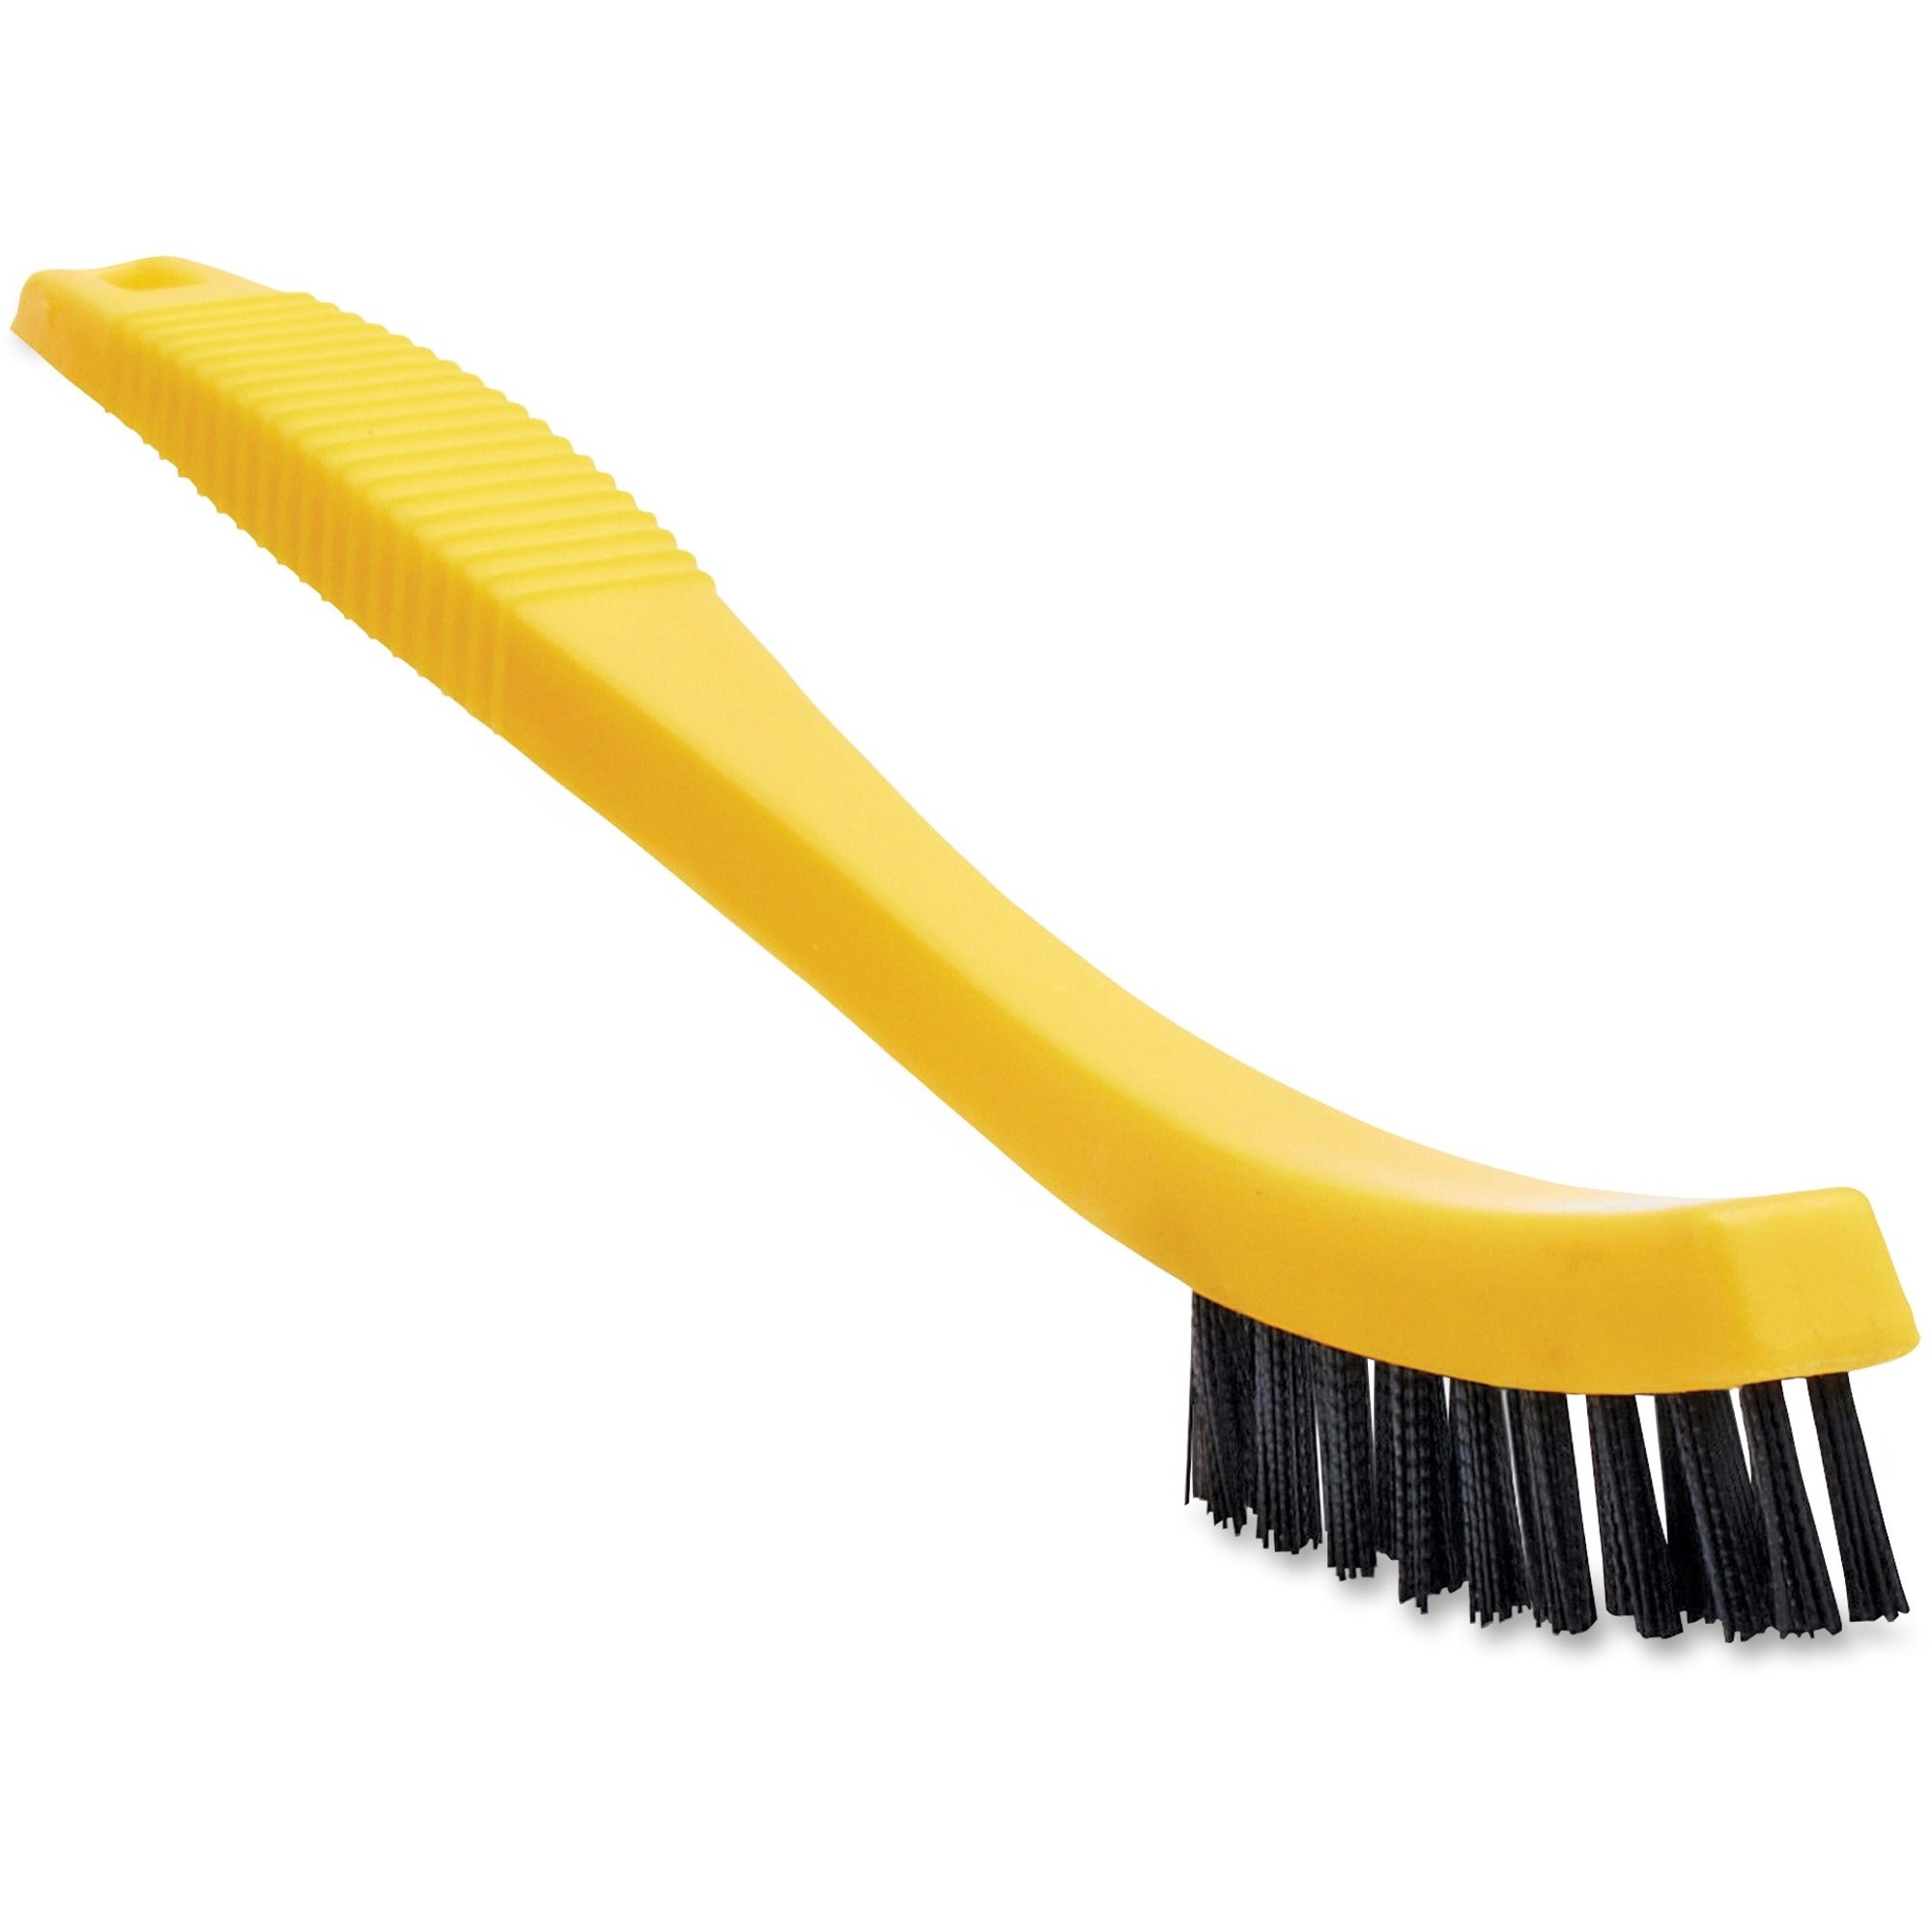 rubbermaid-commercial-tile-grout-brush-080-plastic-bristle-85-overall-length-12-carton-black-yellow_rcp9b5600bkct - 1